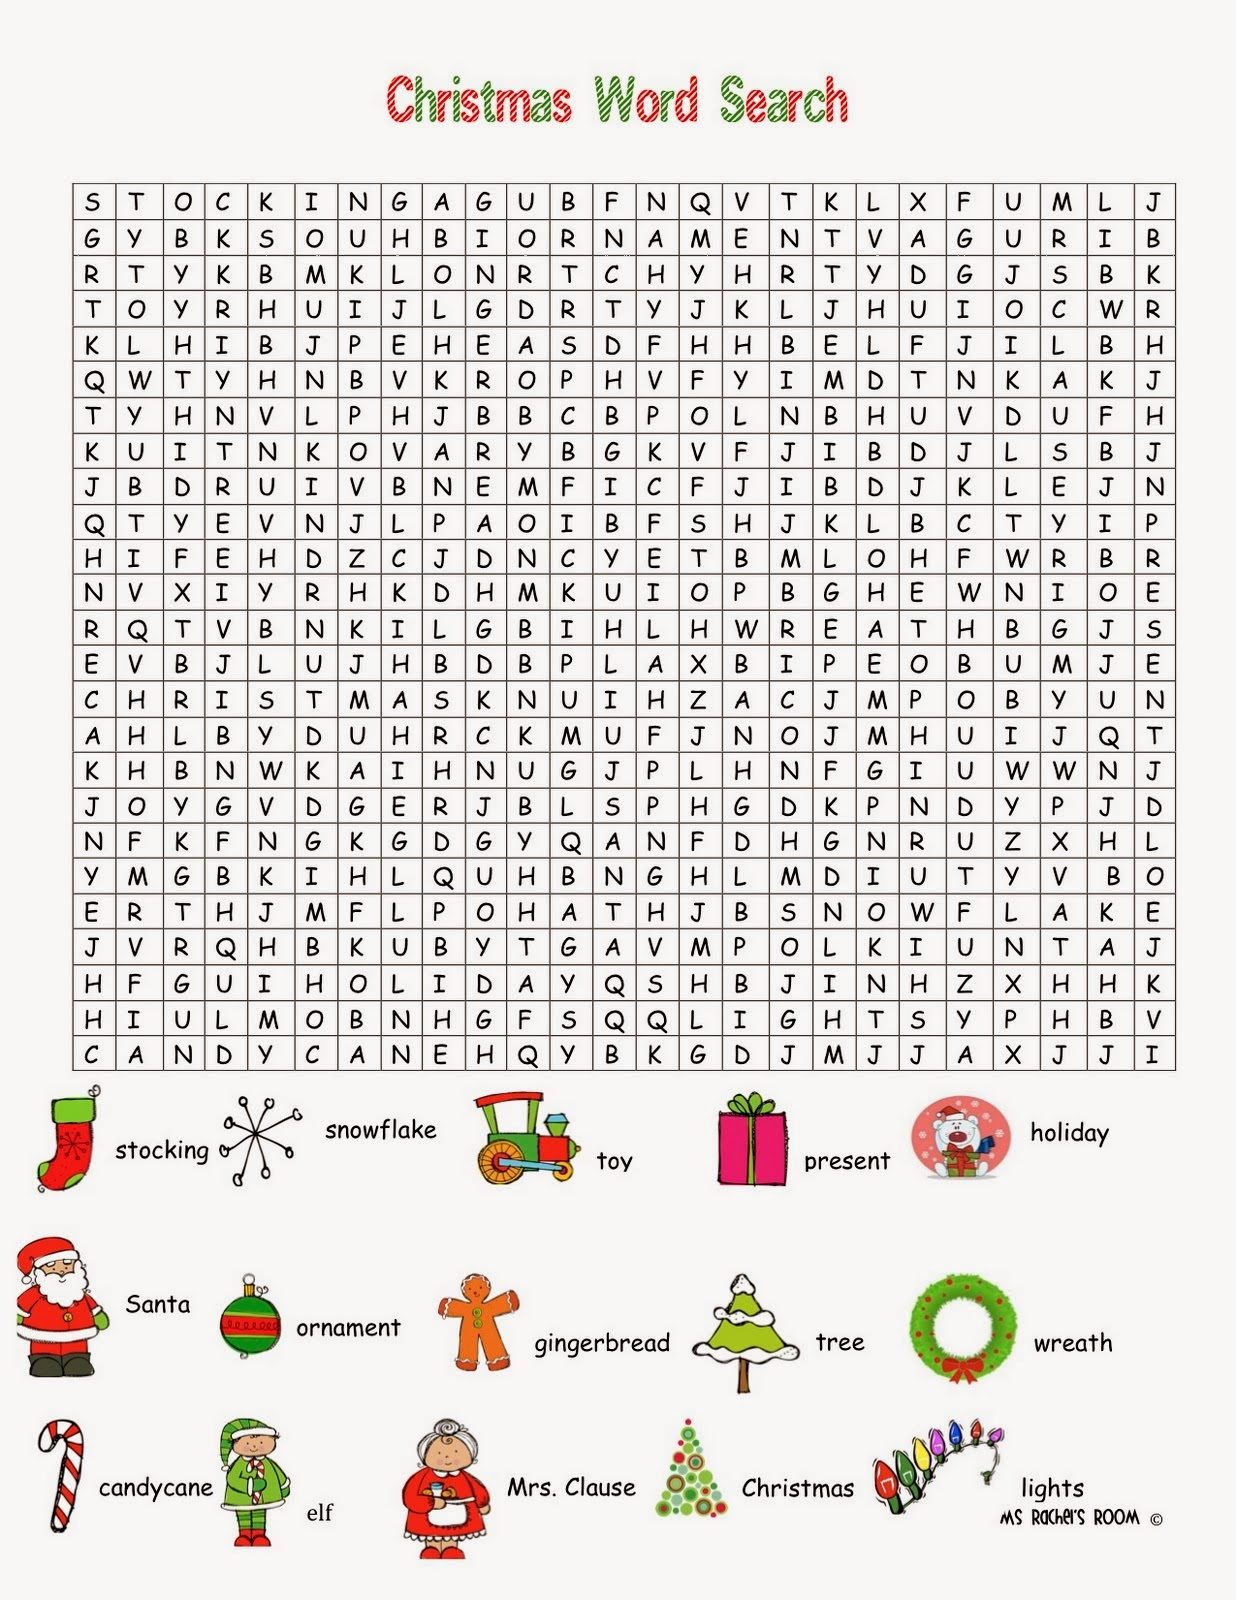 36 Printable Christmas Word Search Puzzles | Kittybabylove